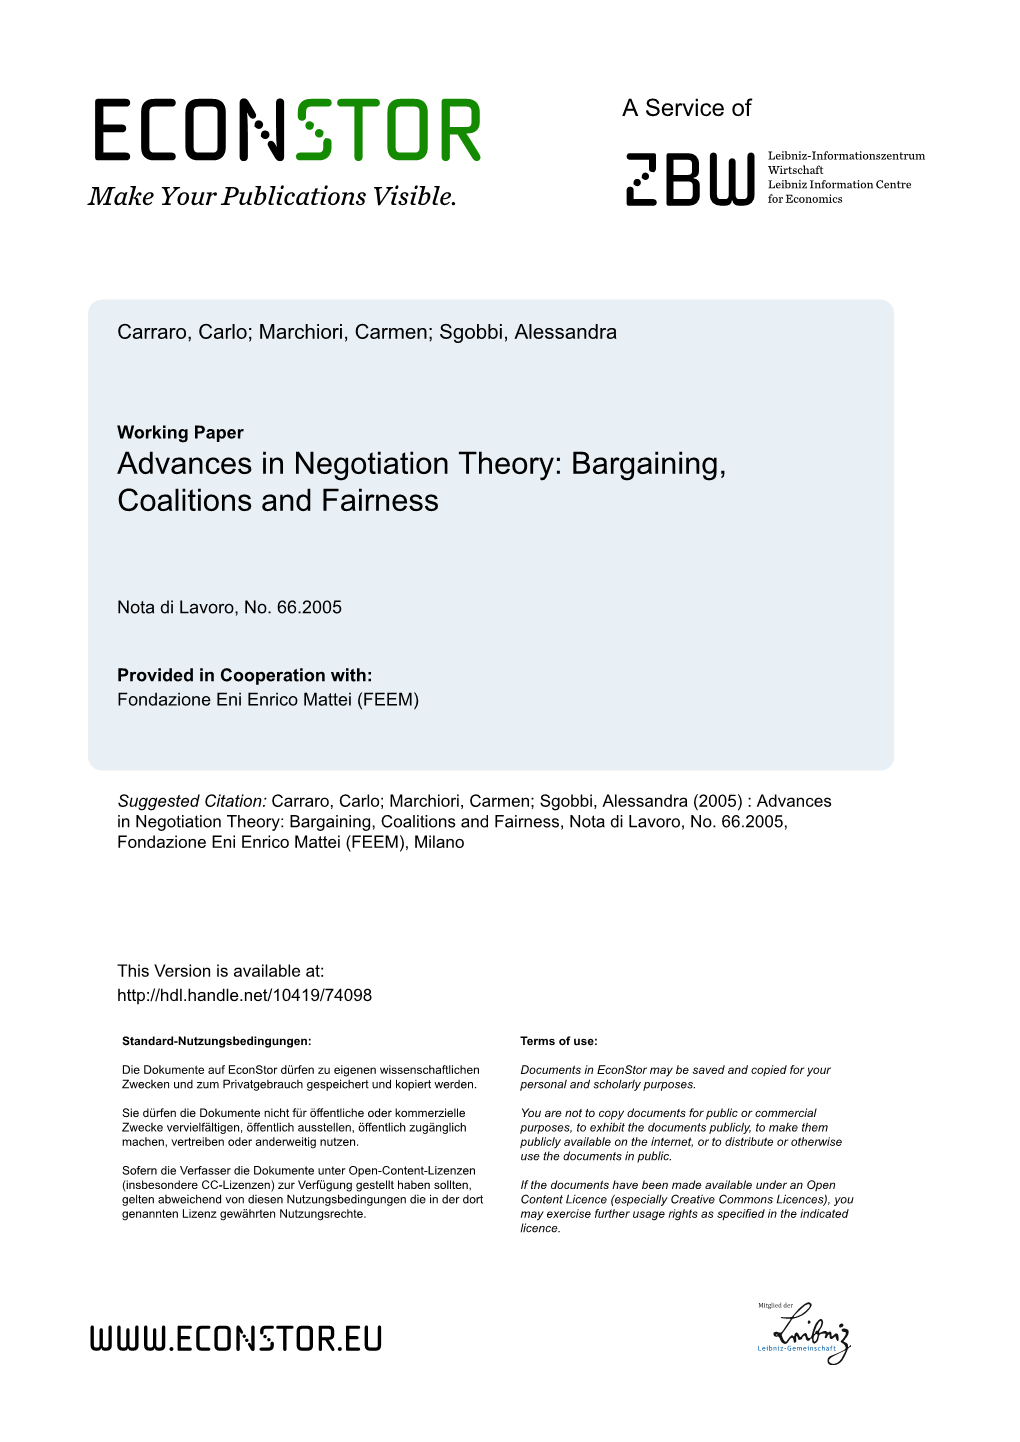 Advances in Negotiation Theory: Bargaining, Coalitions and Fairness